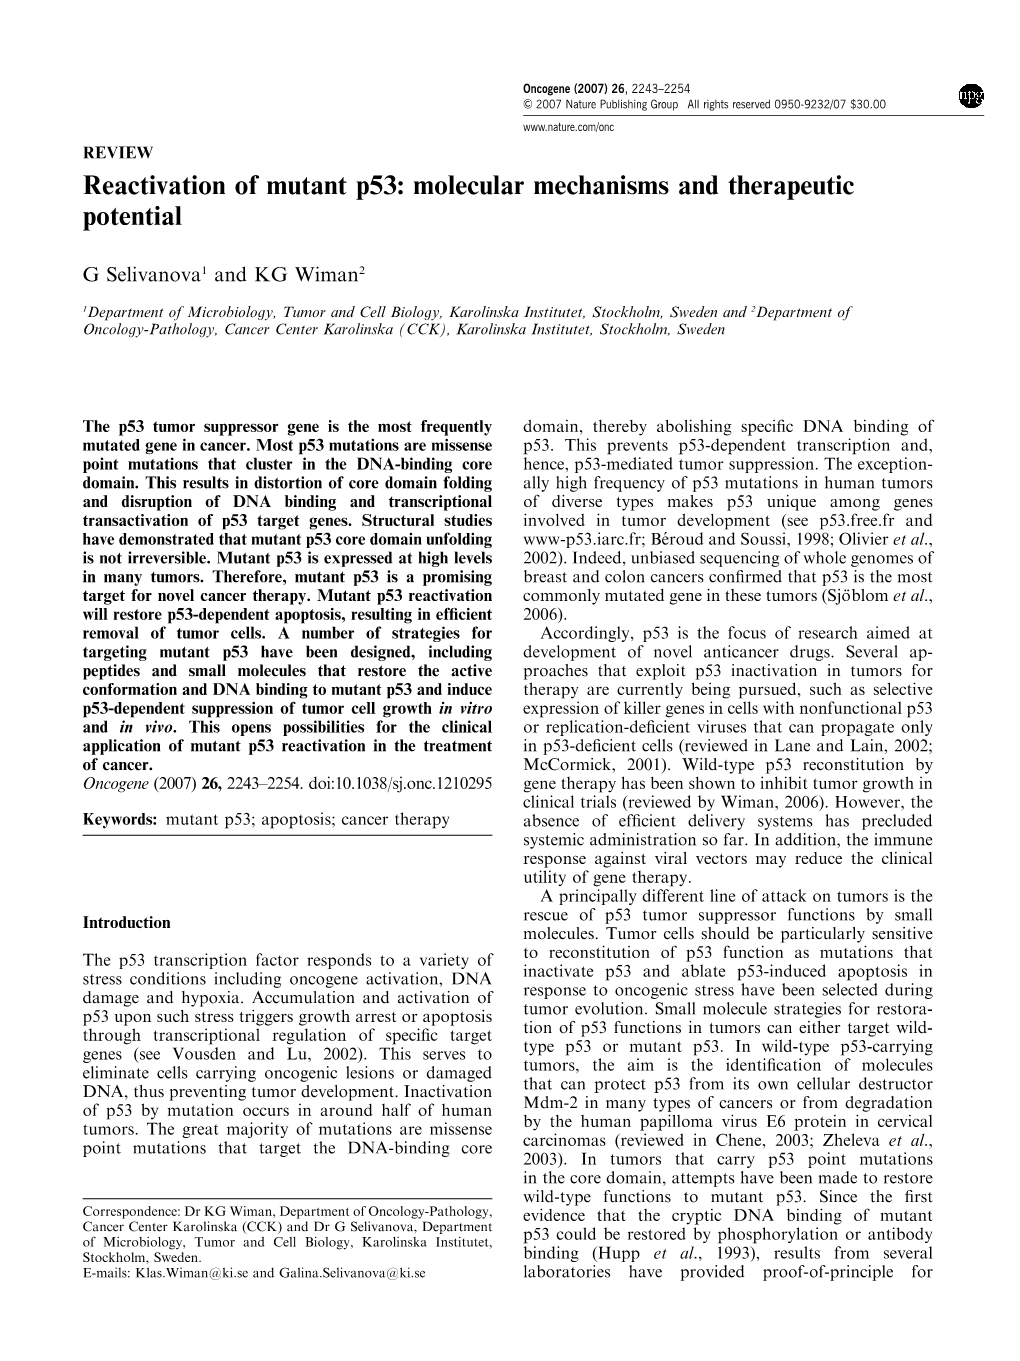 Reactivation of Mutant P53: Molecular Mechanisms and Therapeutic Potential